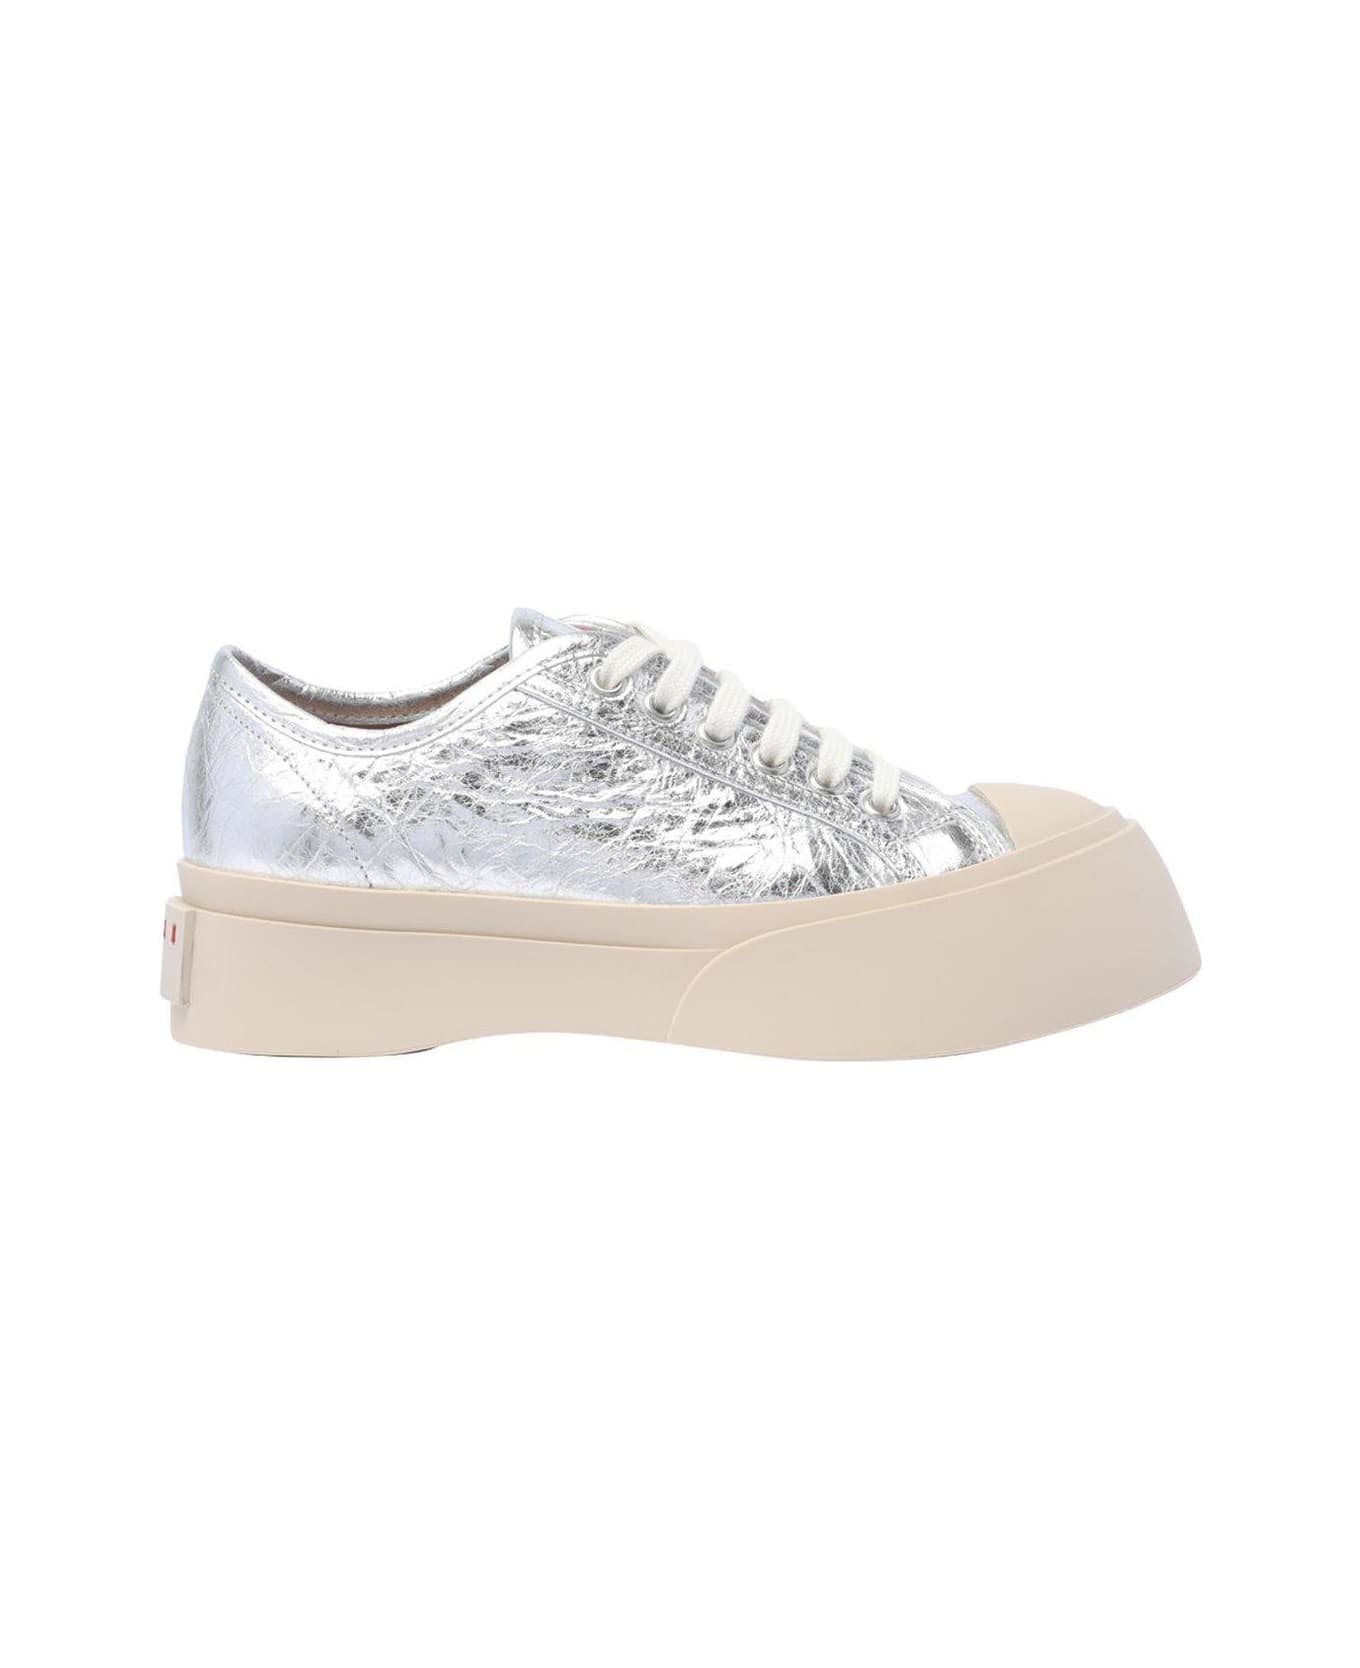 Marni Pablo Lace-up Sneakers - Silver